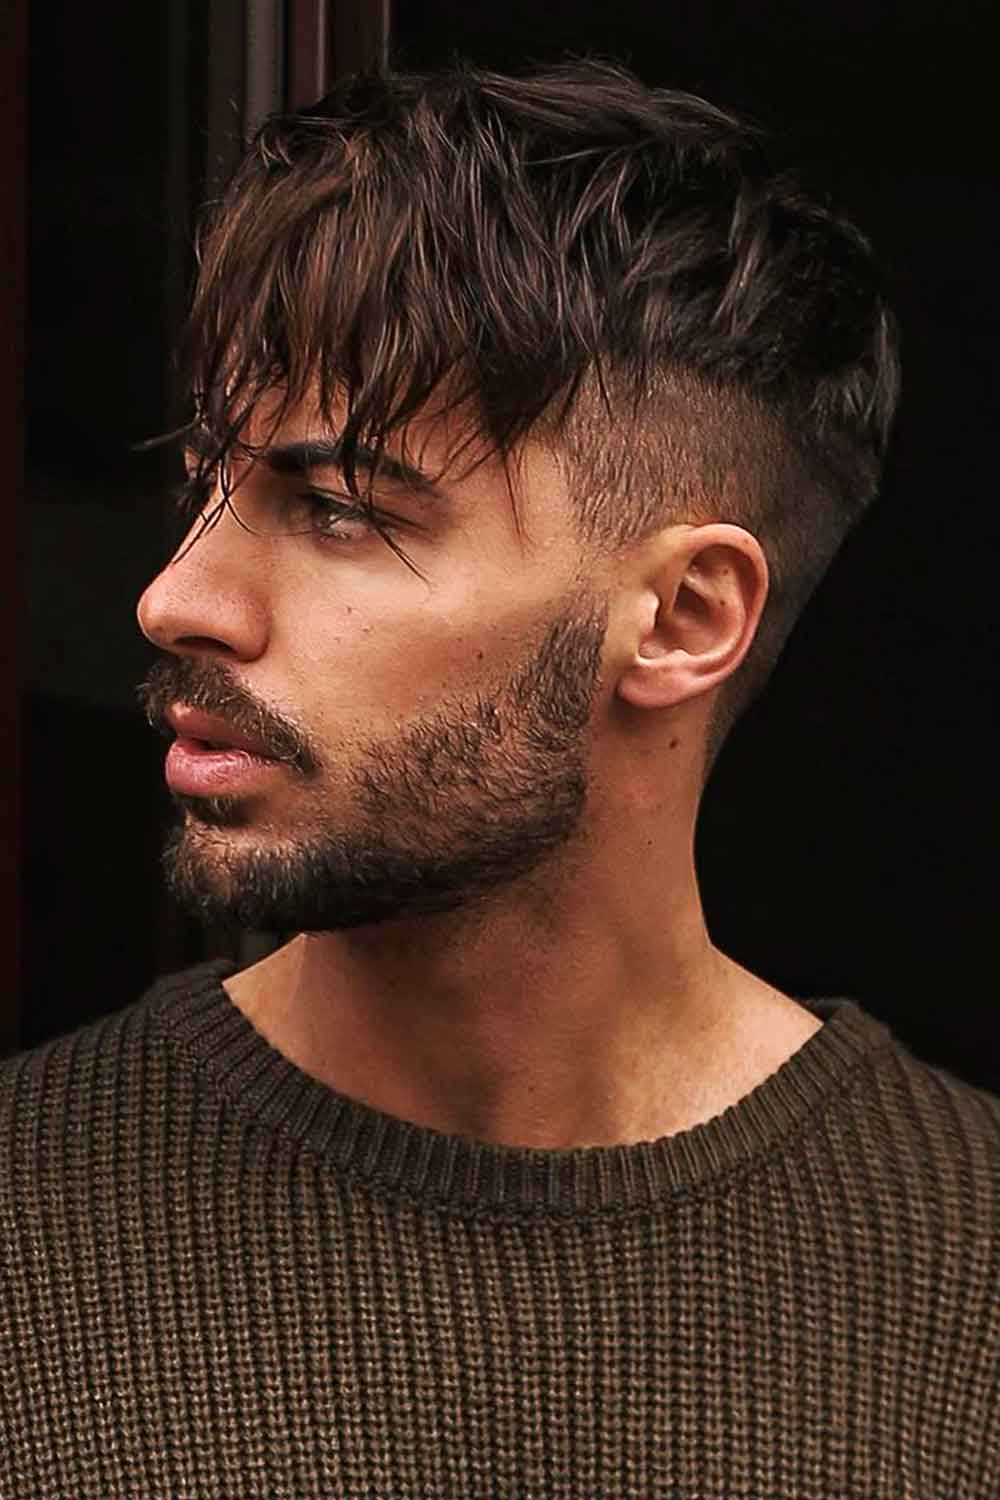 Haircut Names For Men: Types of Haircuts (The Complete Guide) | Haircut  names for men, Mens hairstyles pompadour, Pompadour hairstyle